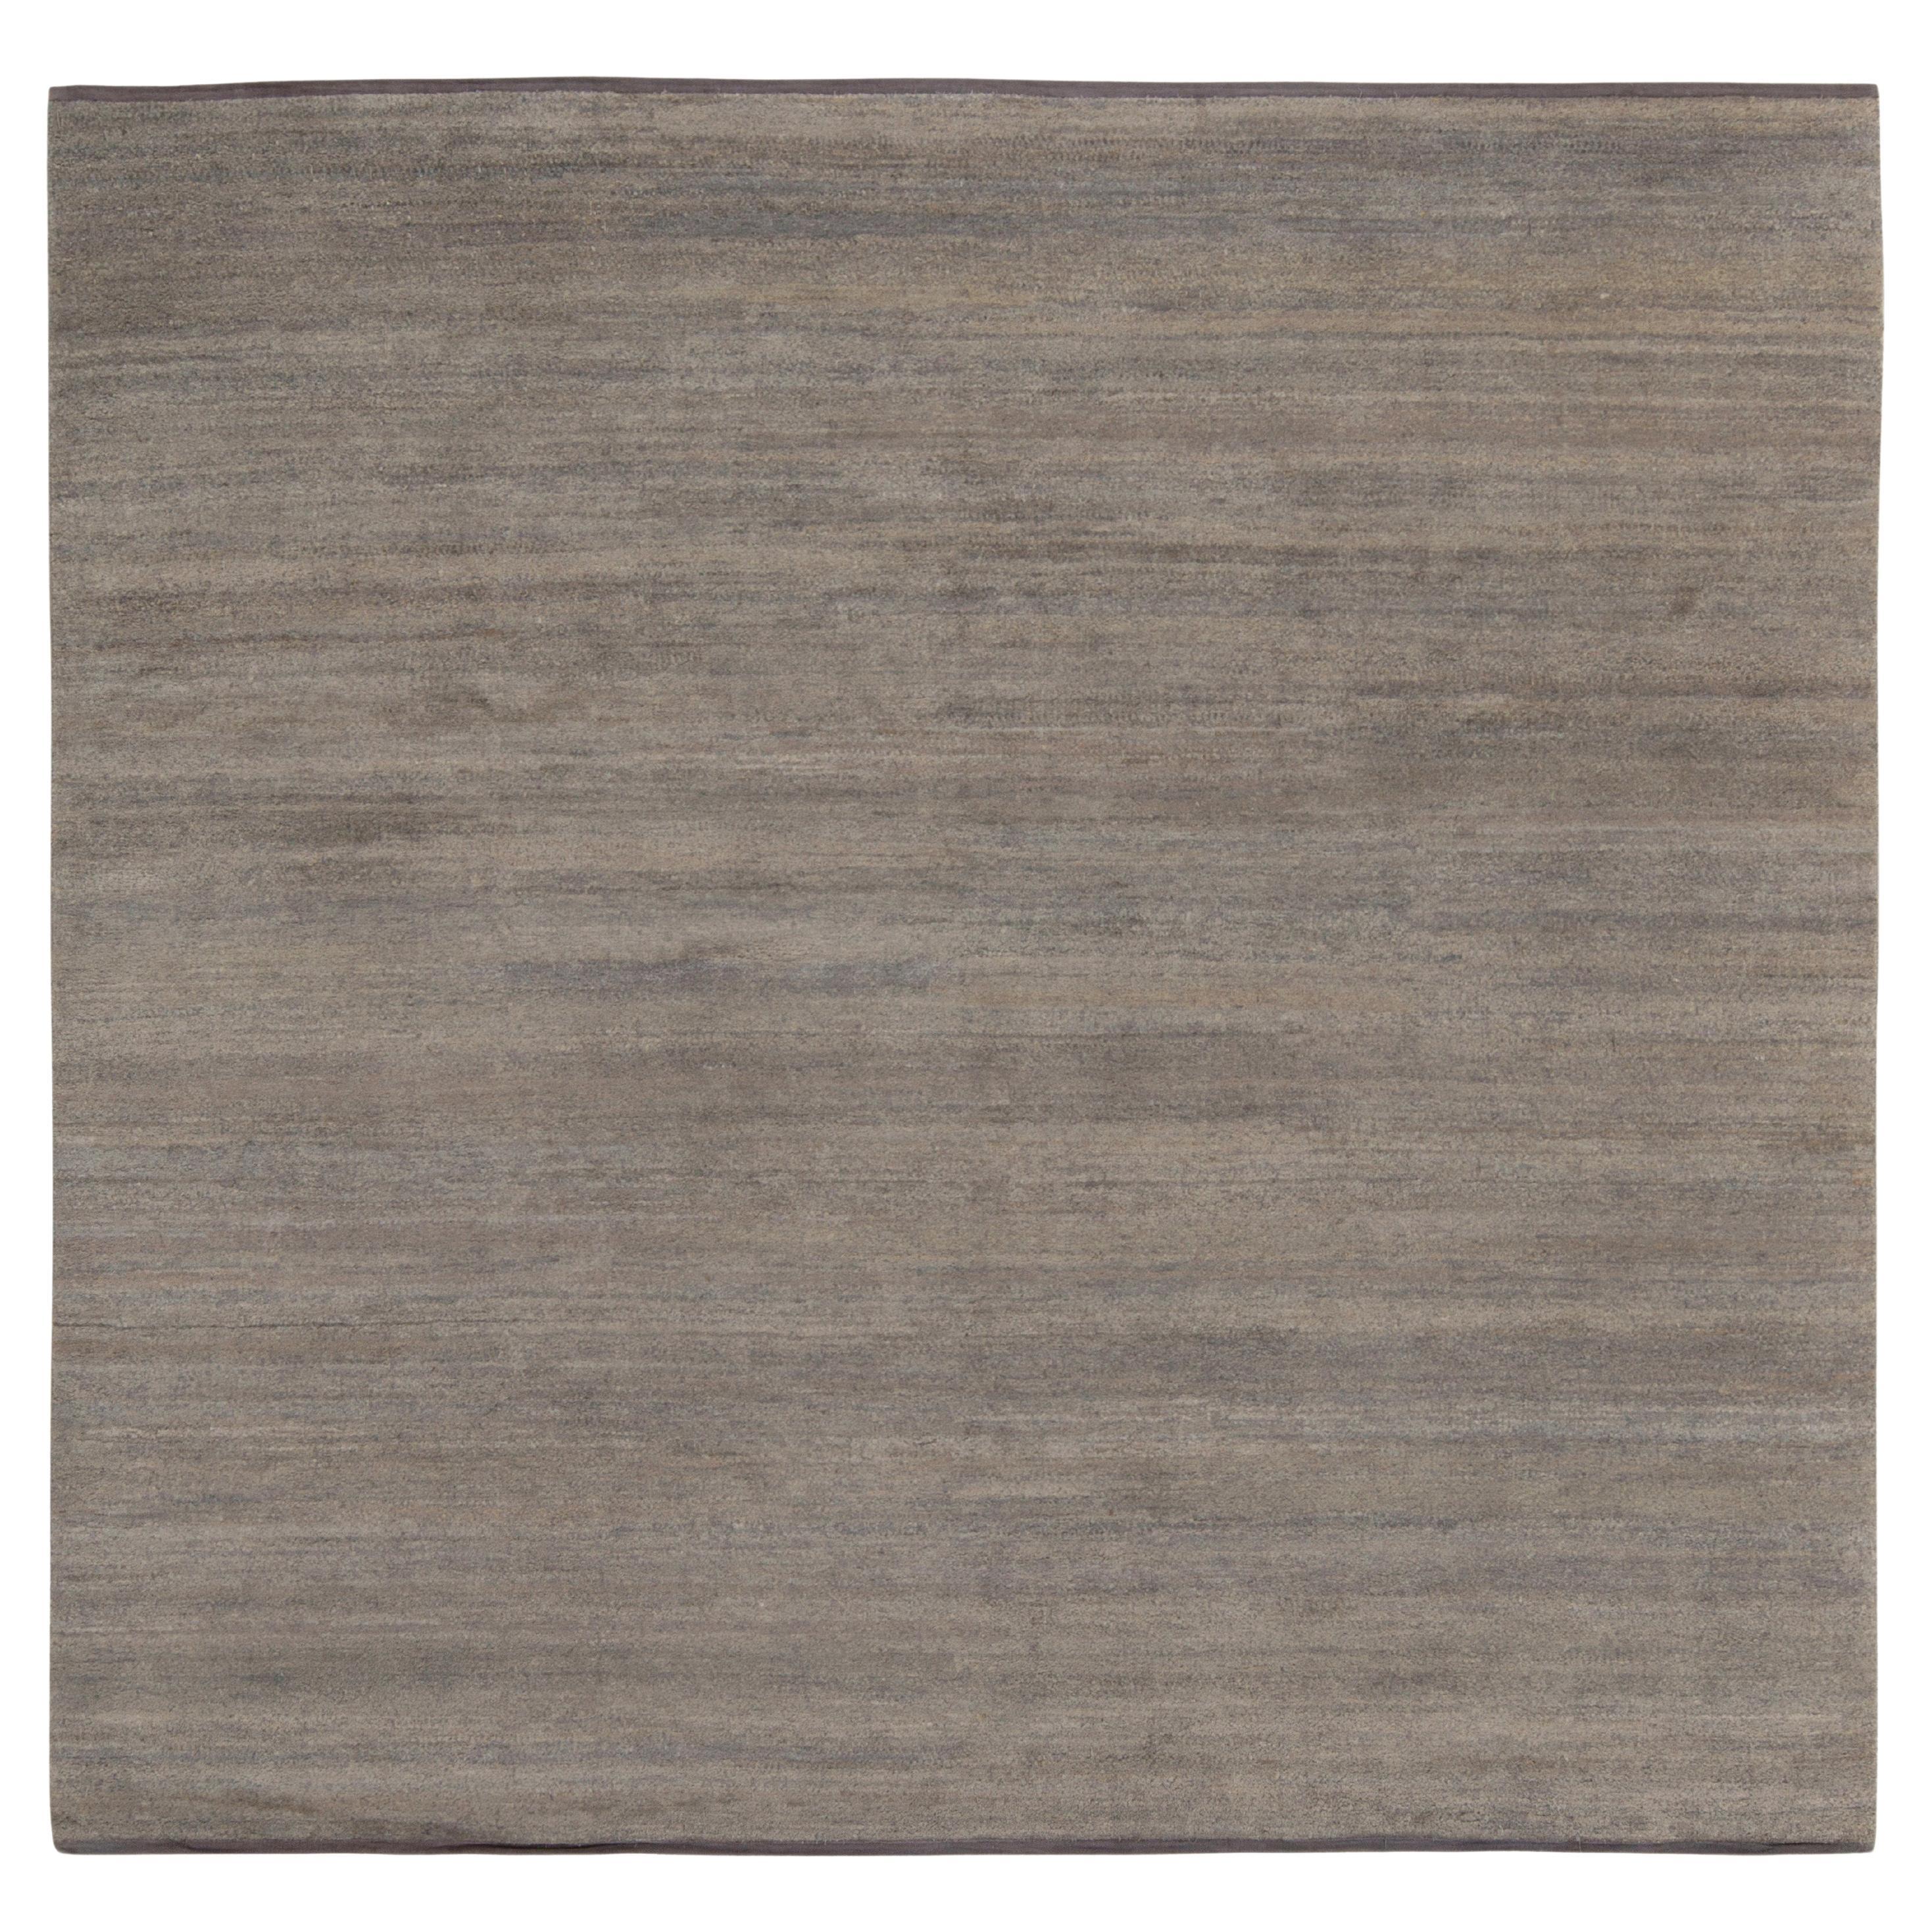 Rug & Kilim's Hand-Knotted Contemporary Square Rug in Solid Gray For Sale